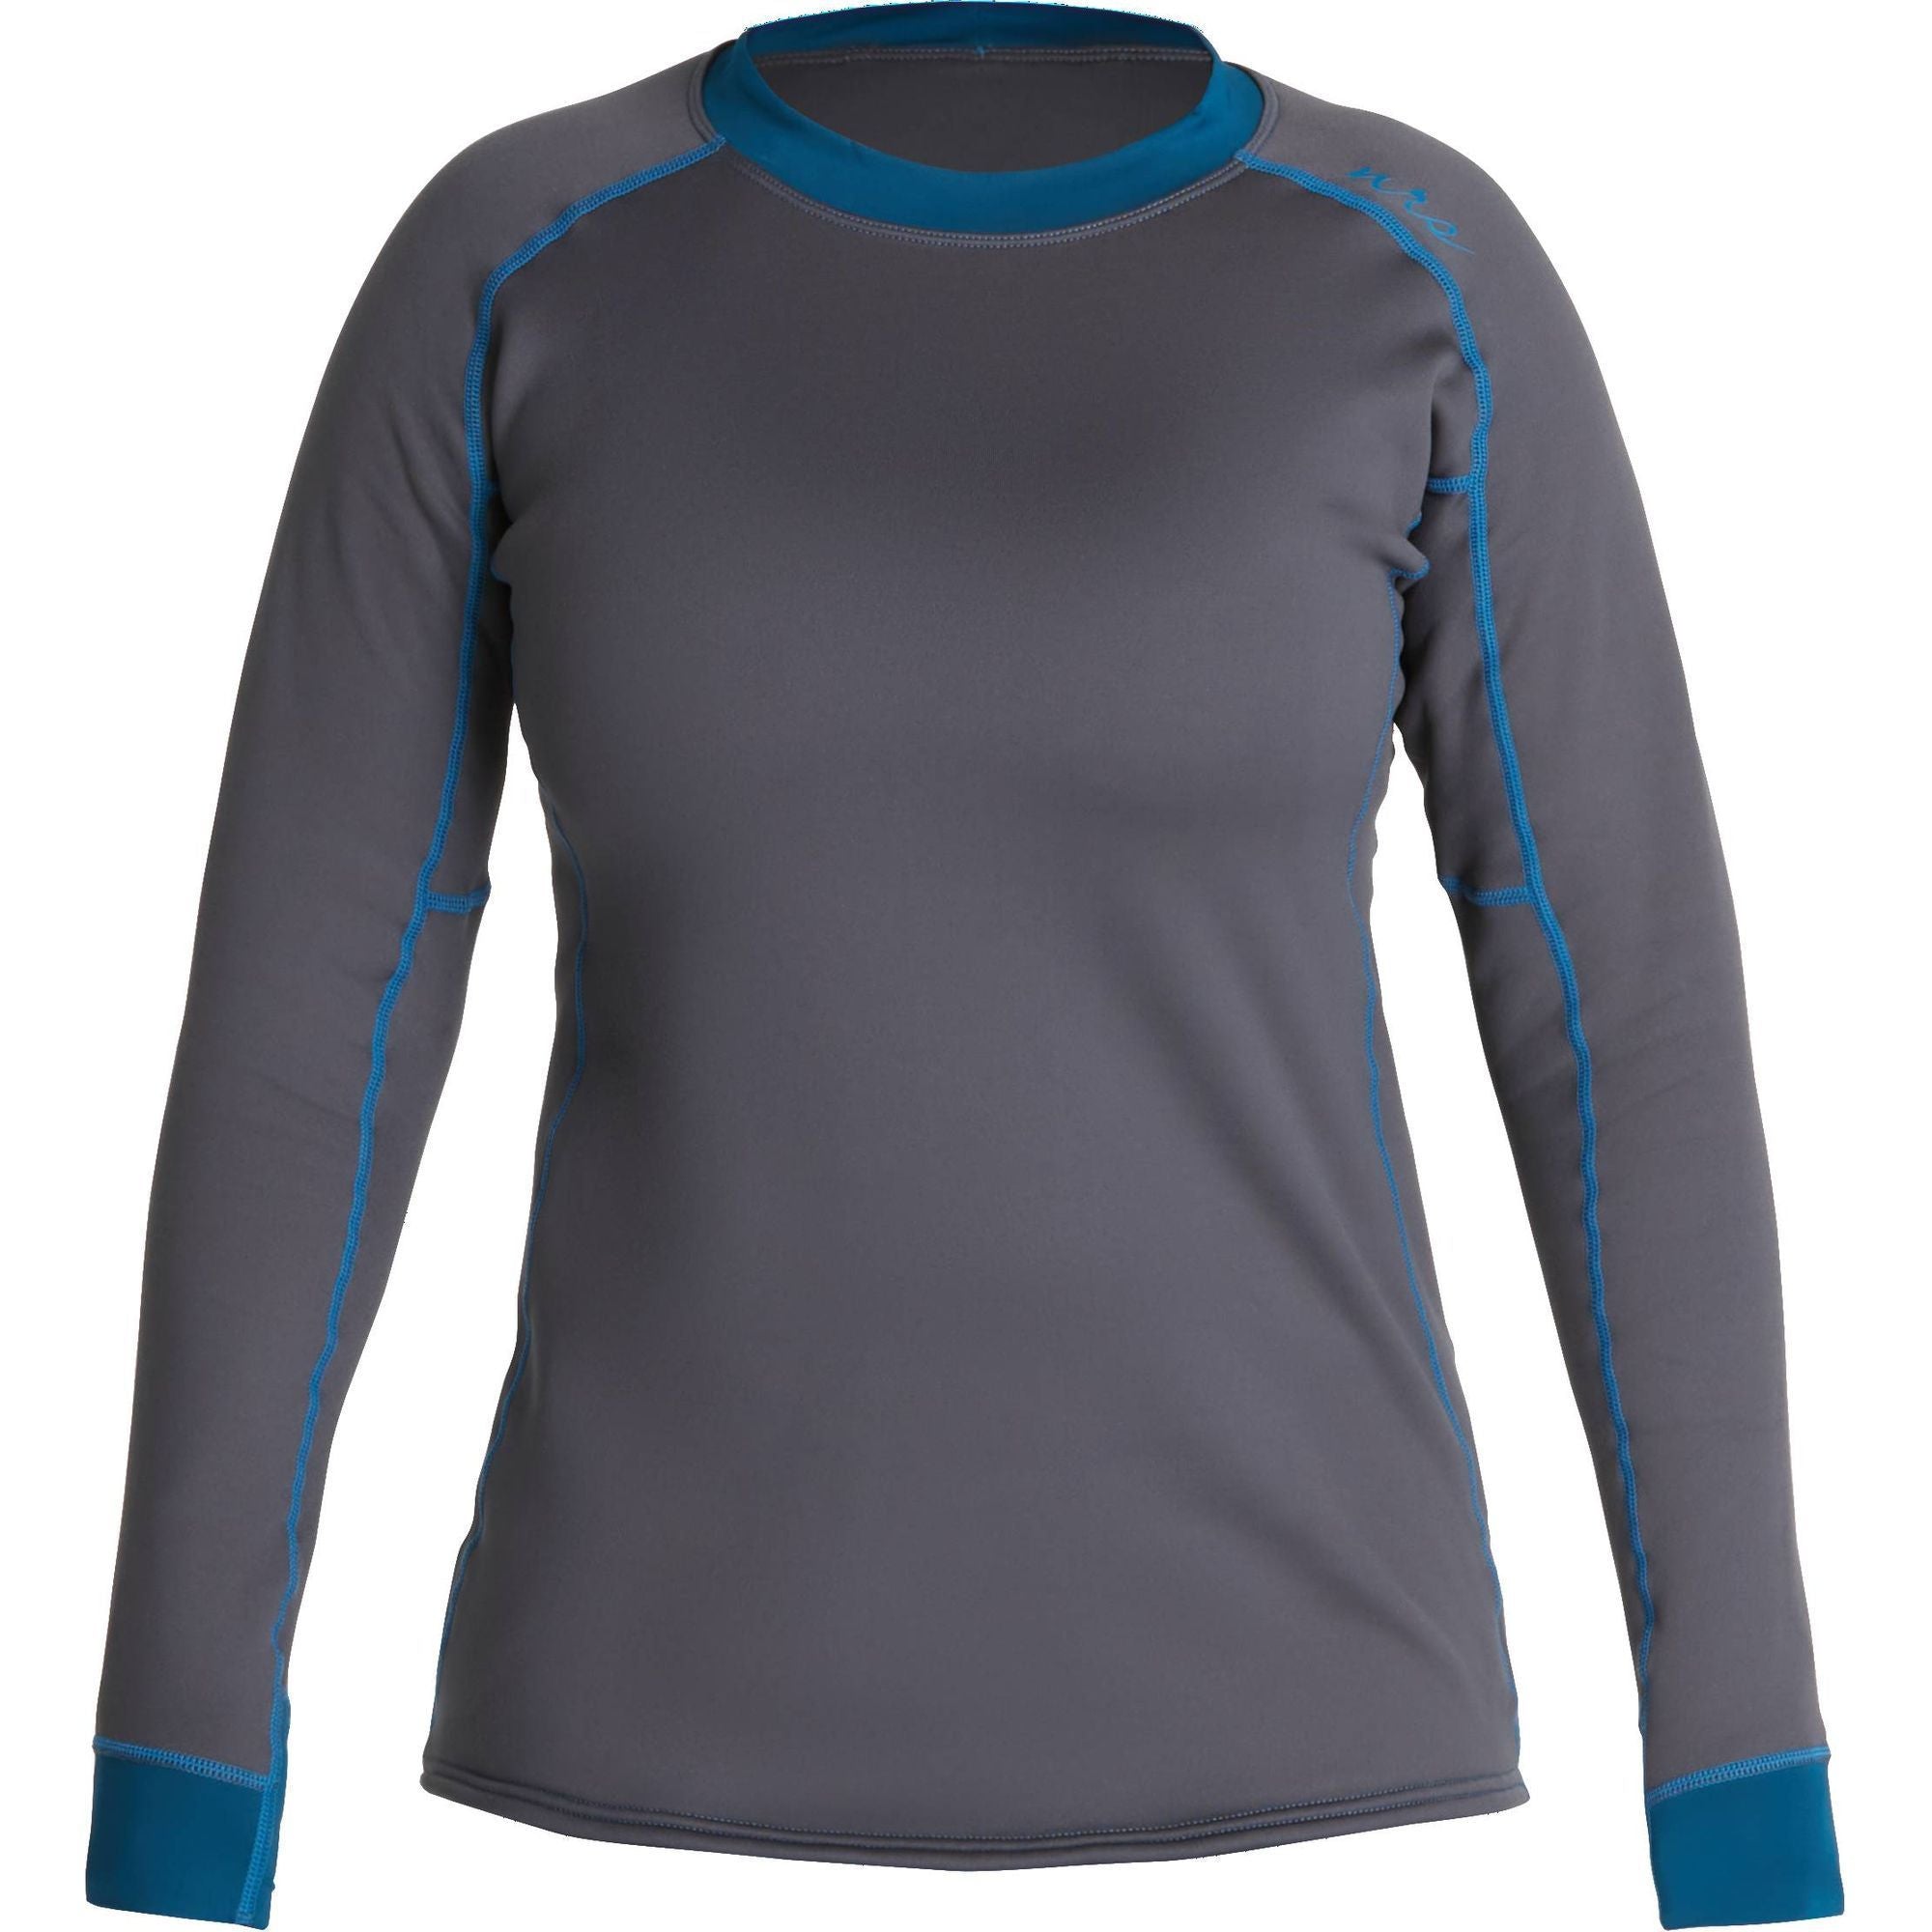 NRS Expedition Weight Union Shirt, Women's